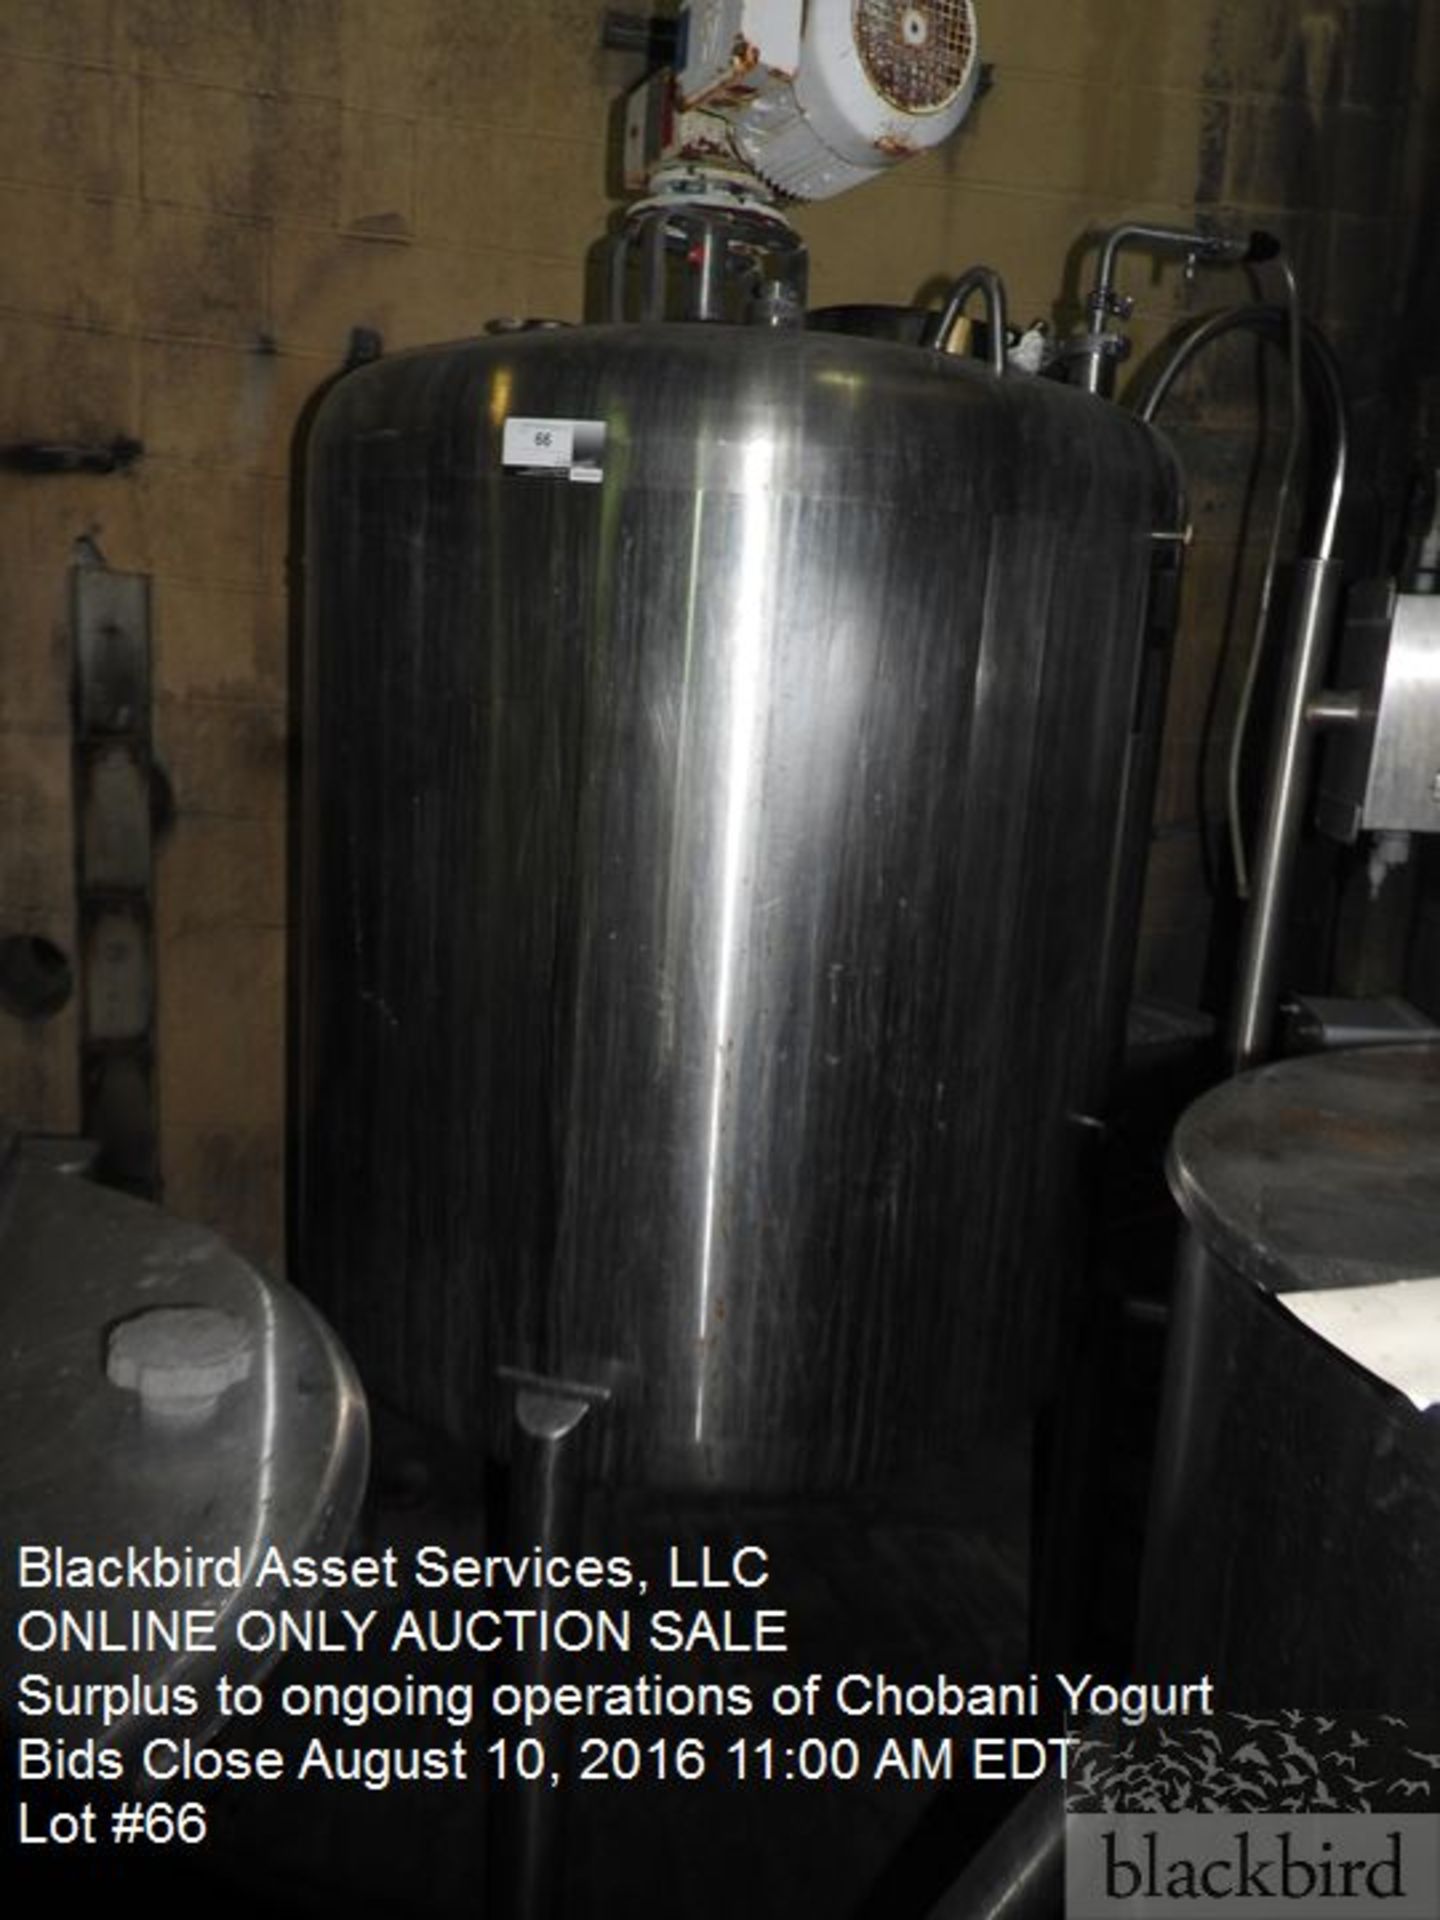 Walker dome top mix tank, 225 gallon, stainless steel, s/n 5679, 1989, top entering sweep agitator